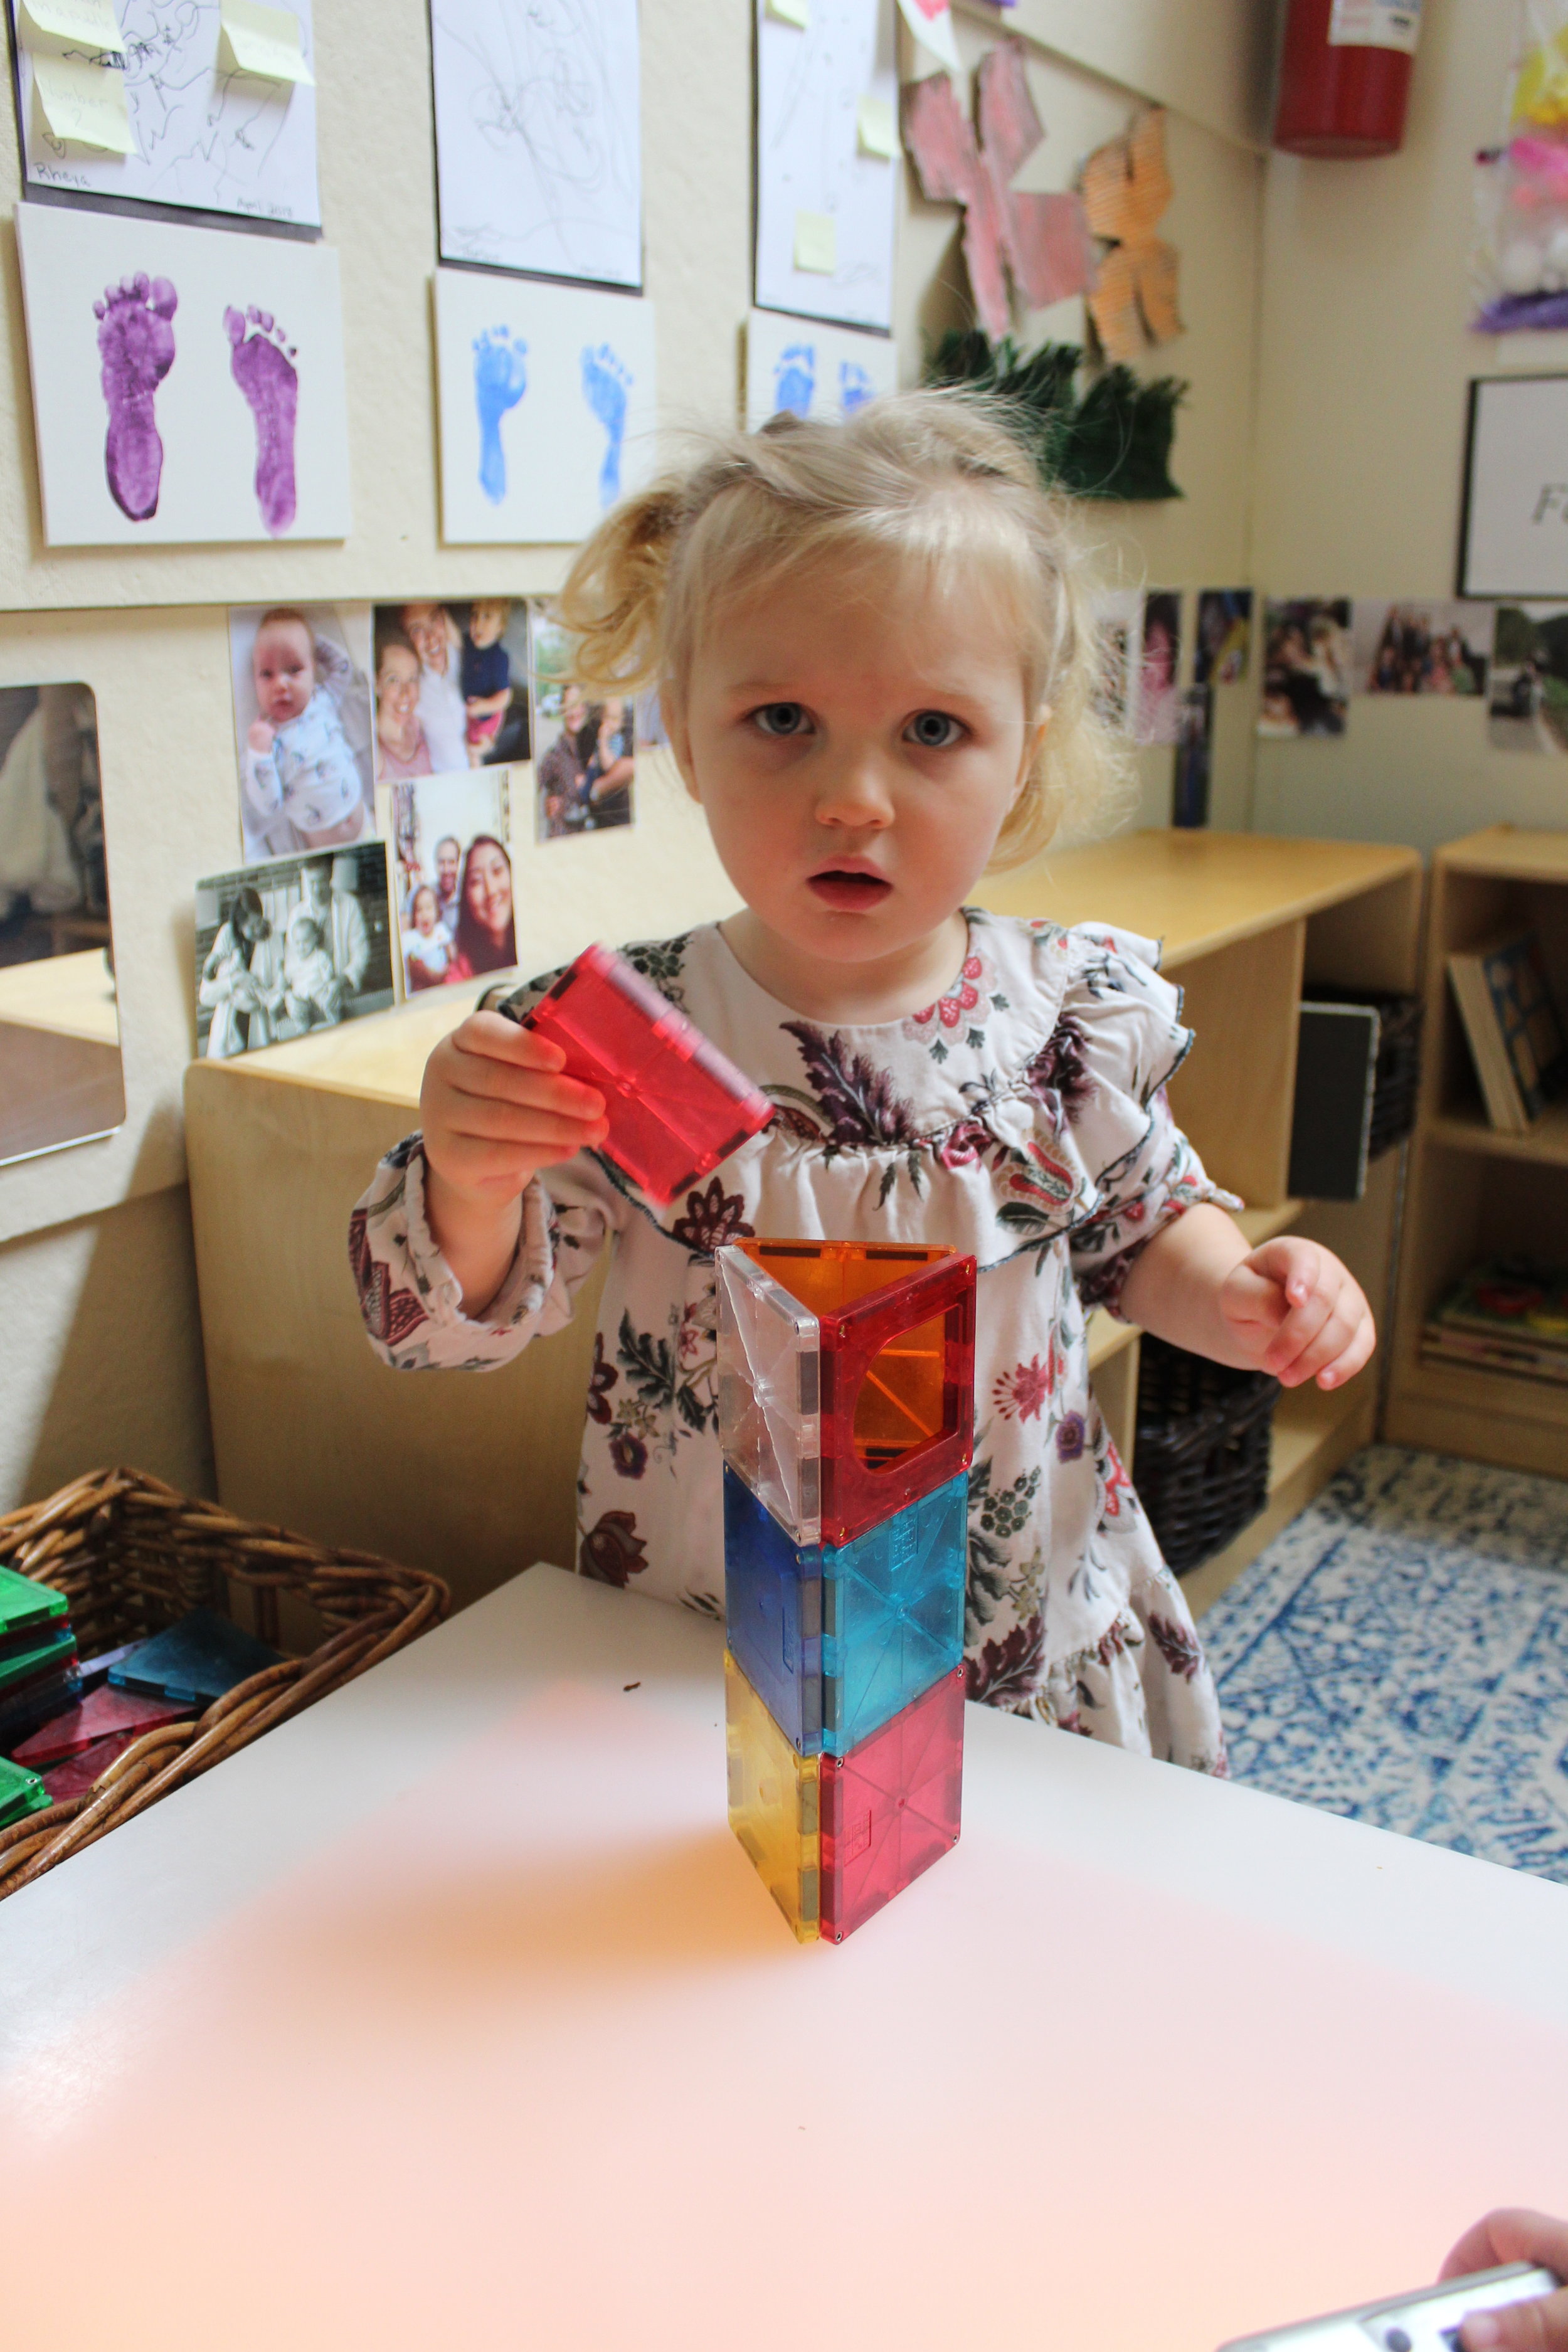  Magna-tiles vary in shapes to build and rebuild different structures. They foster critical developmental skills, imaginative play, and creativity. The unique pieces engage children in in-depth investigations.  Madeline explores, creates and manipula